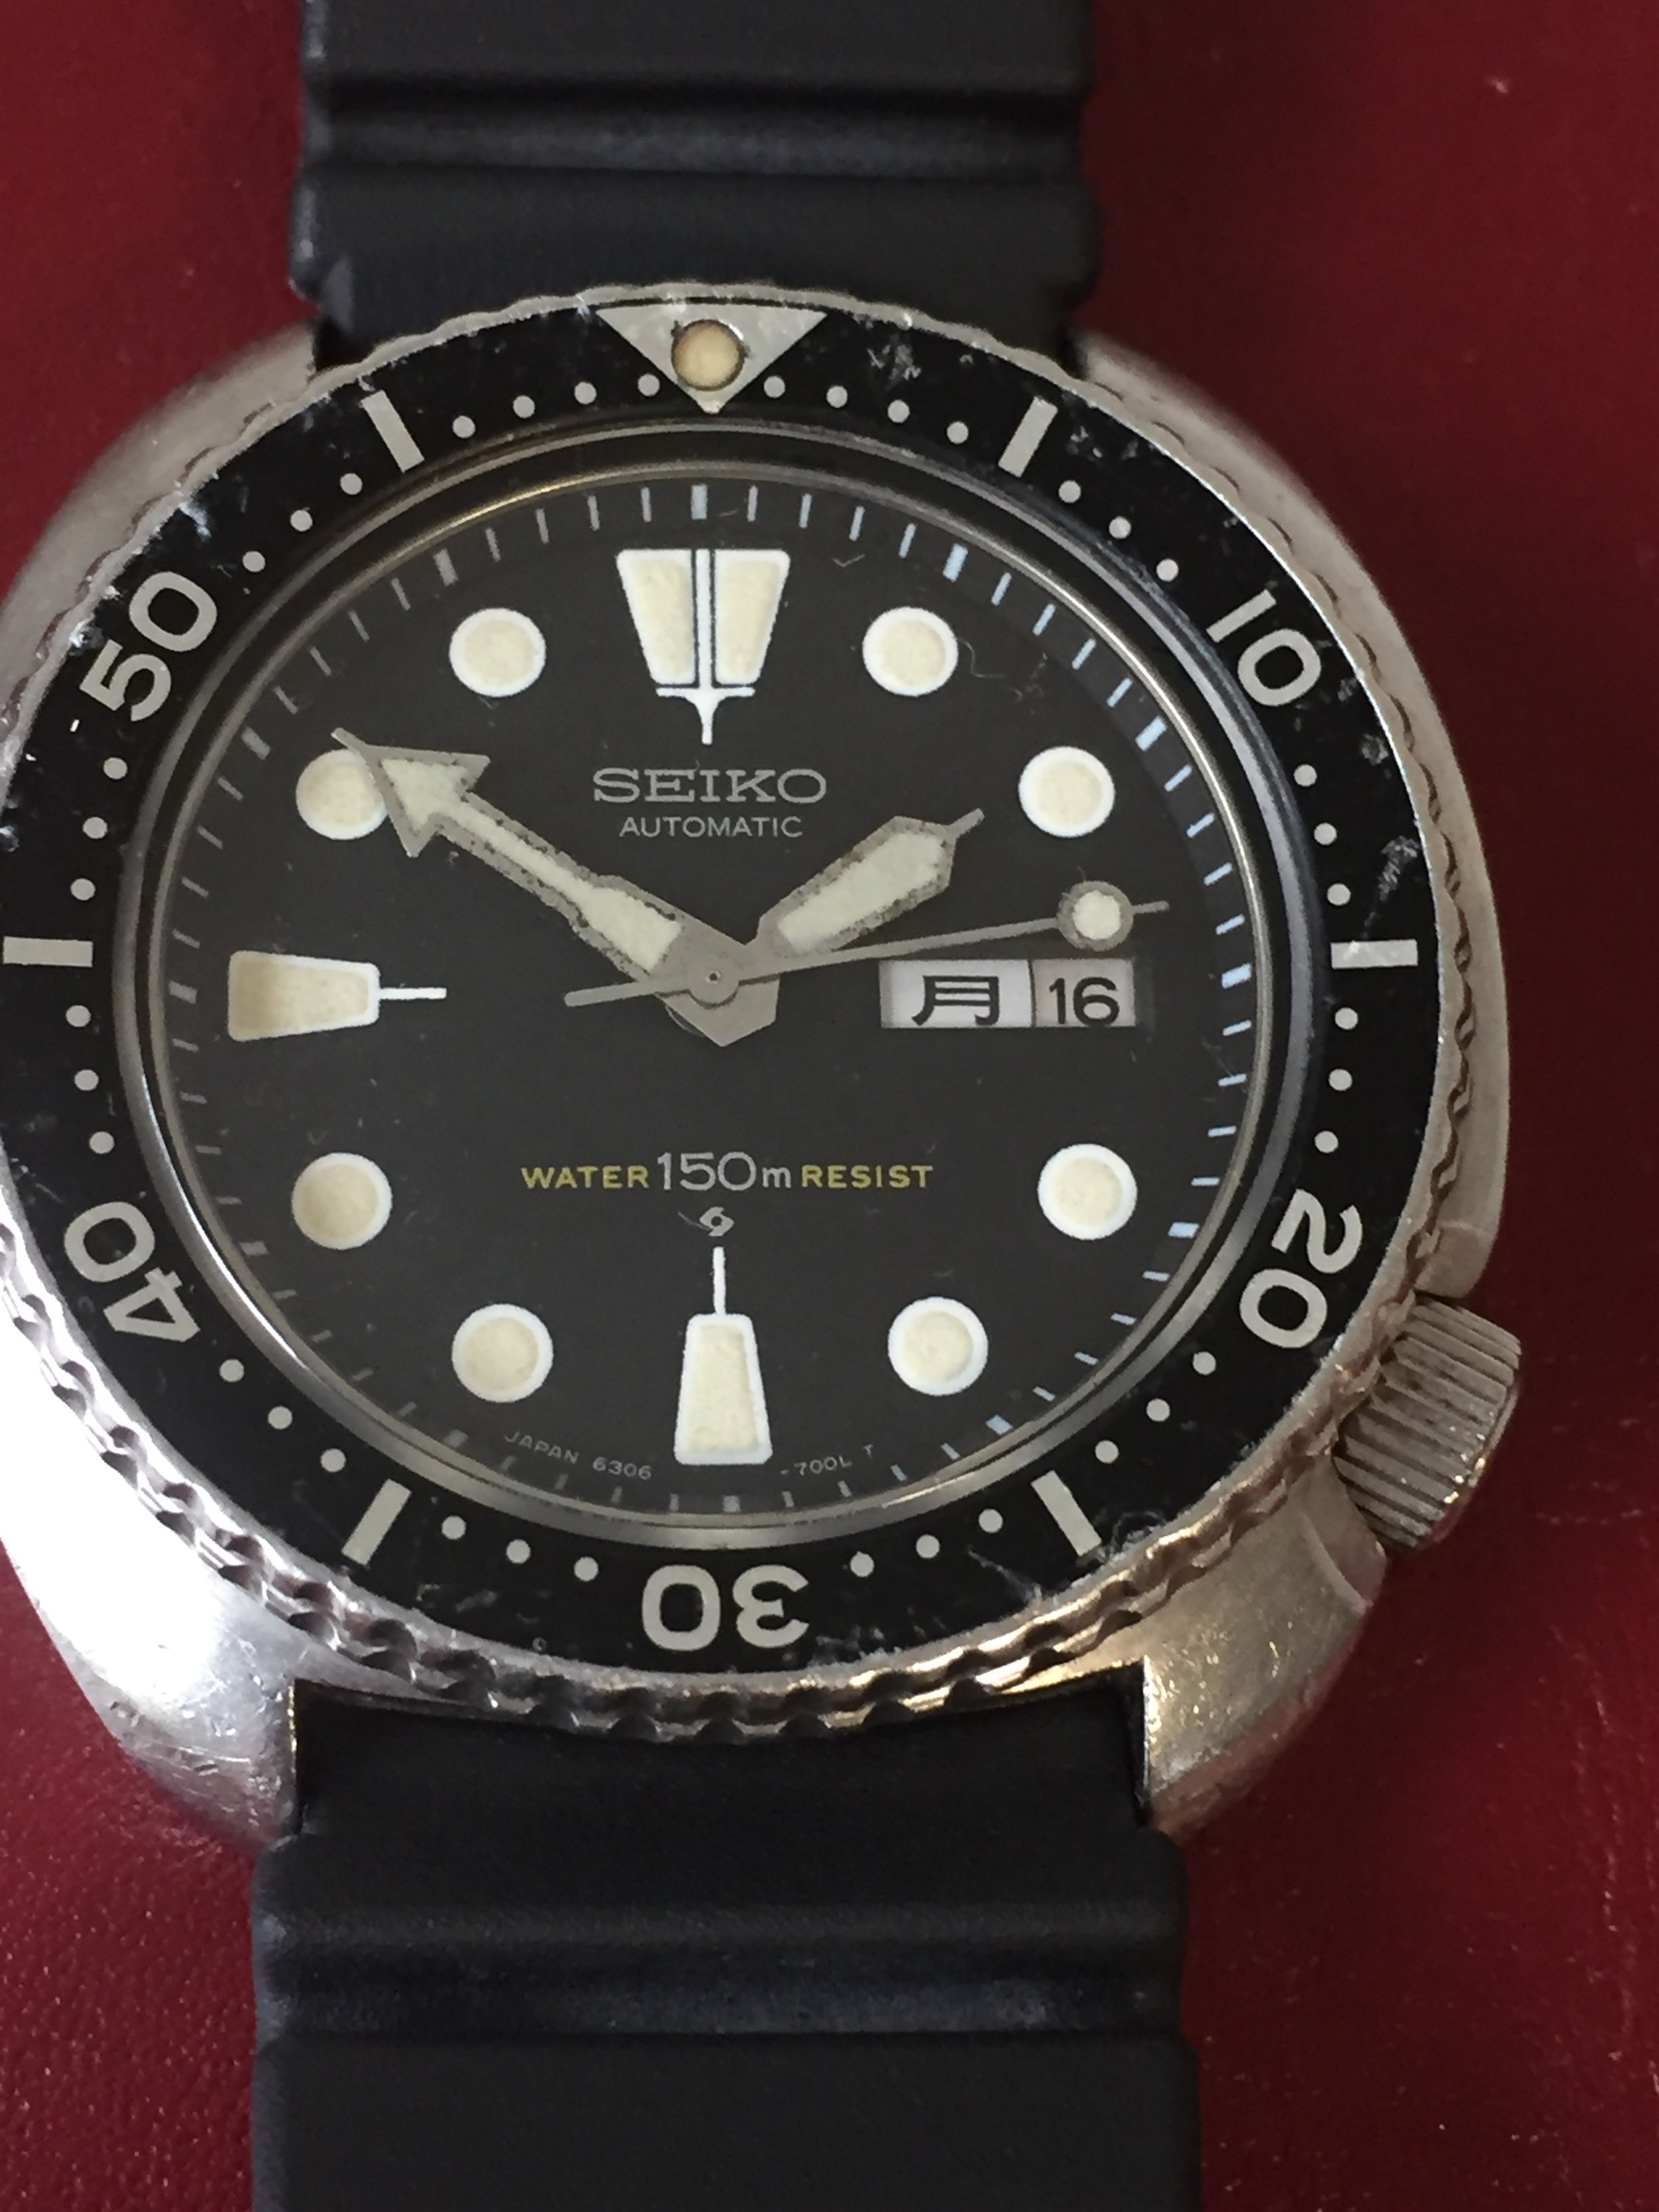 SOLD - 1976 Seiko 6306 7001 Dive Watch + OEM Seiko Strap Serviced 2017 |  Omega Forums